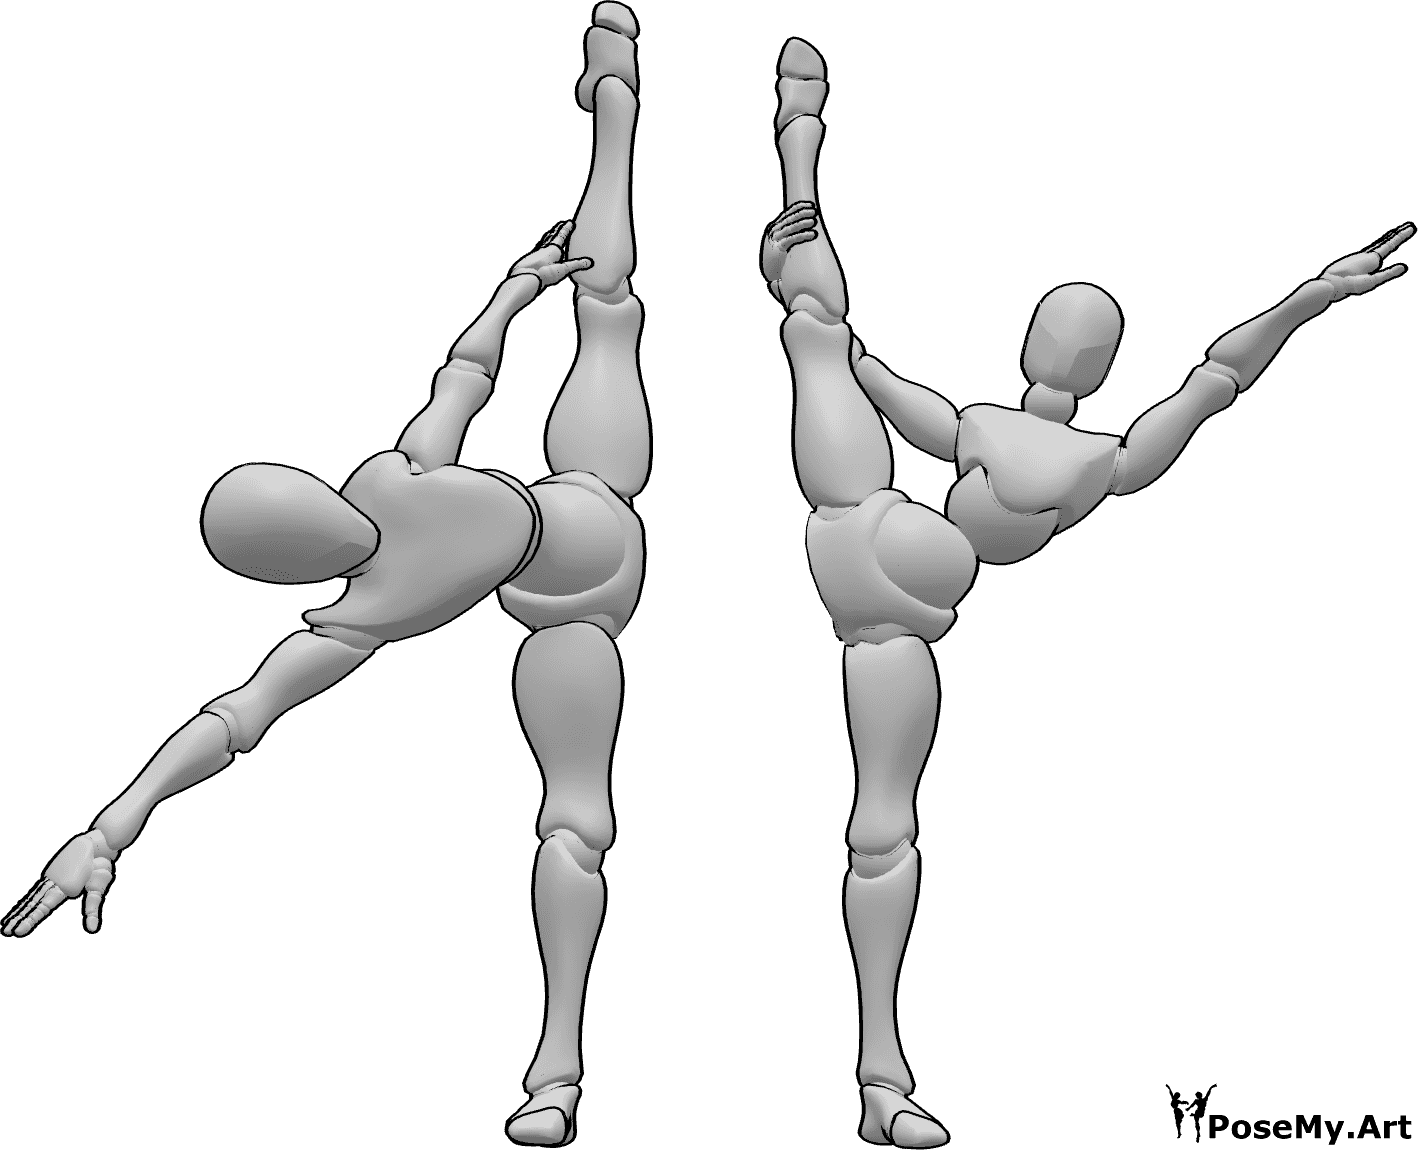 Pose Reference- Standing side splits pose - Two females are doing side splits while standing